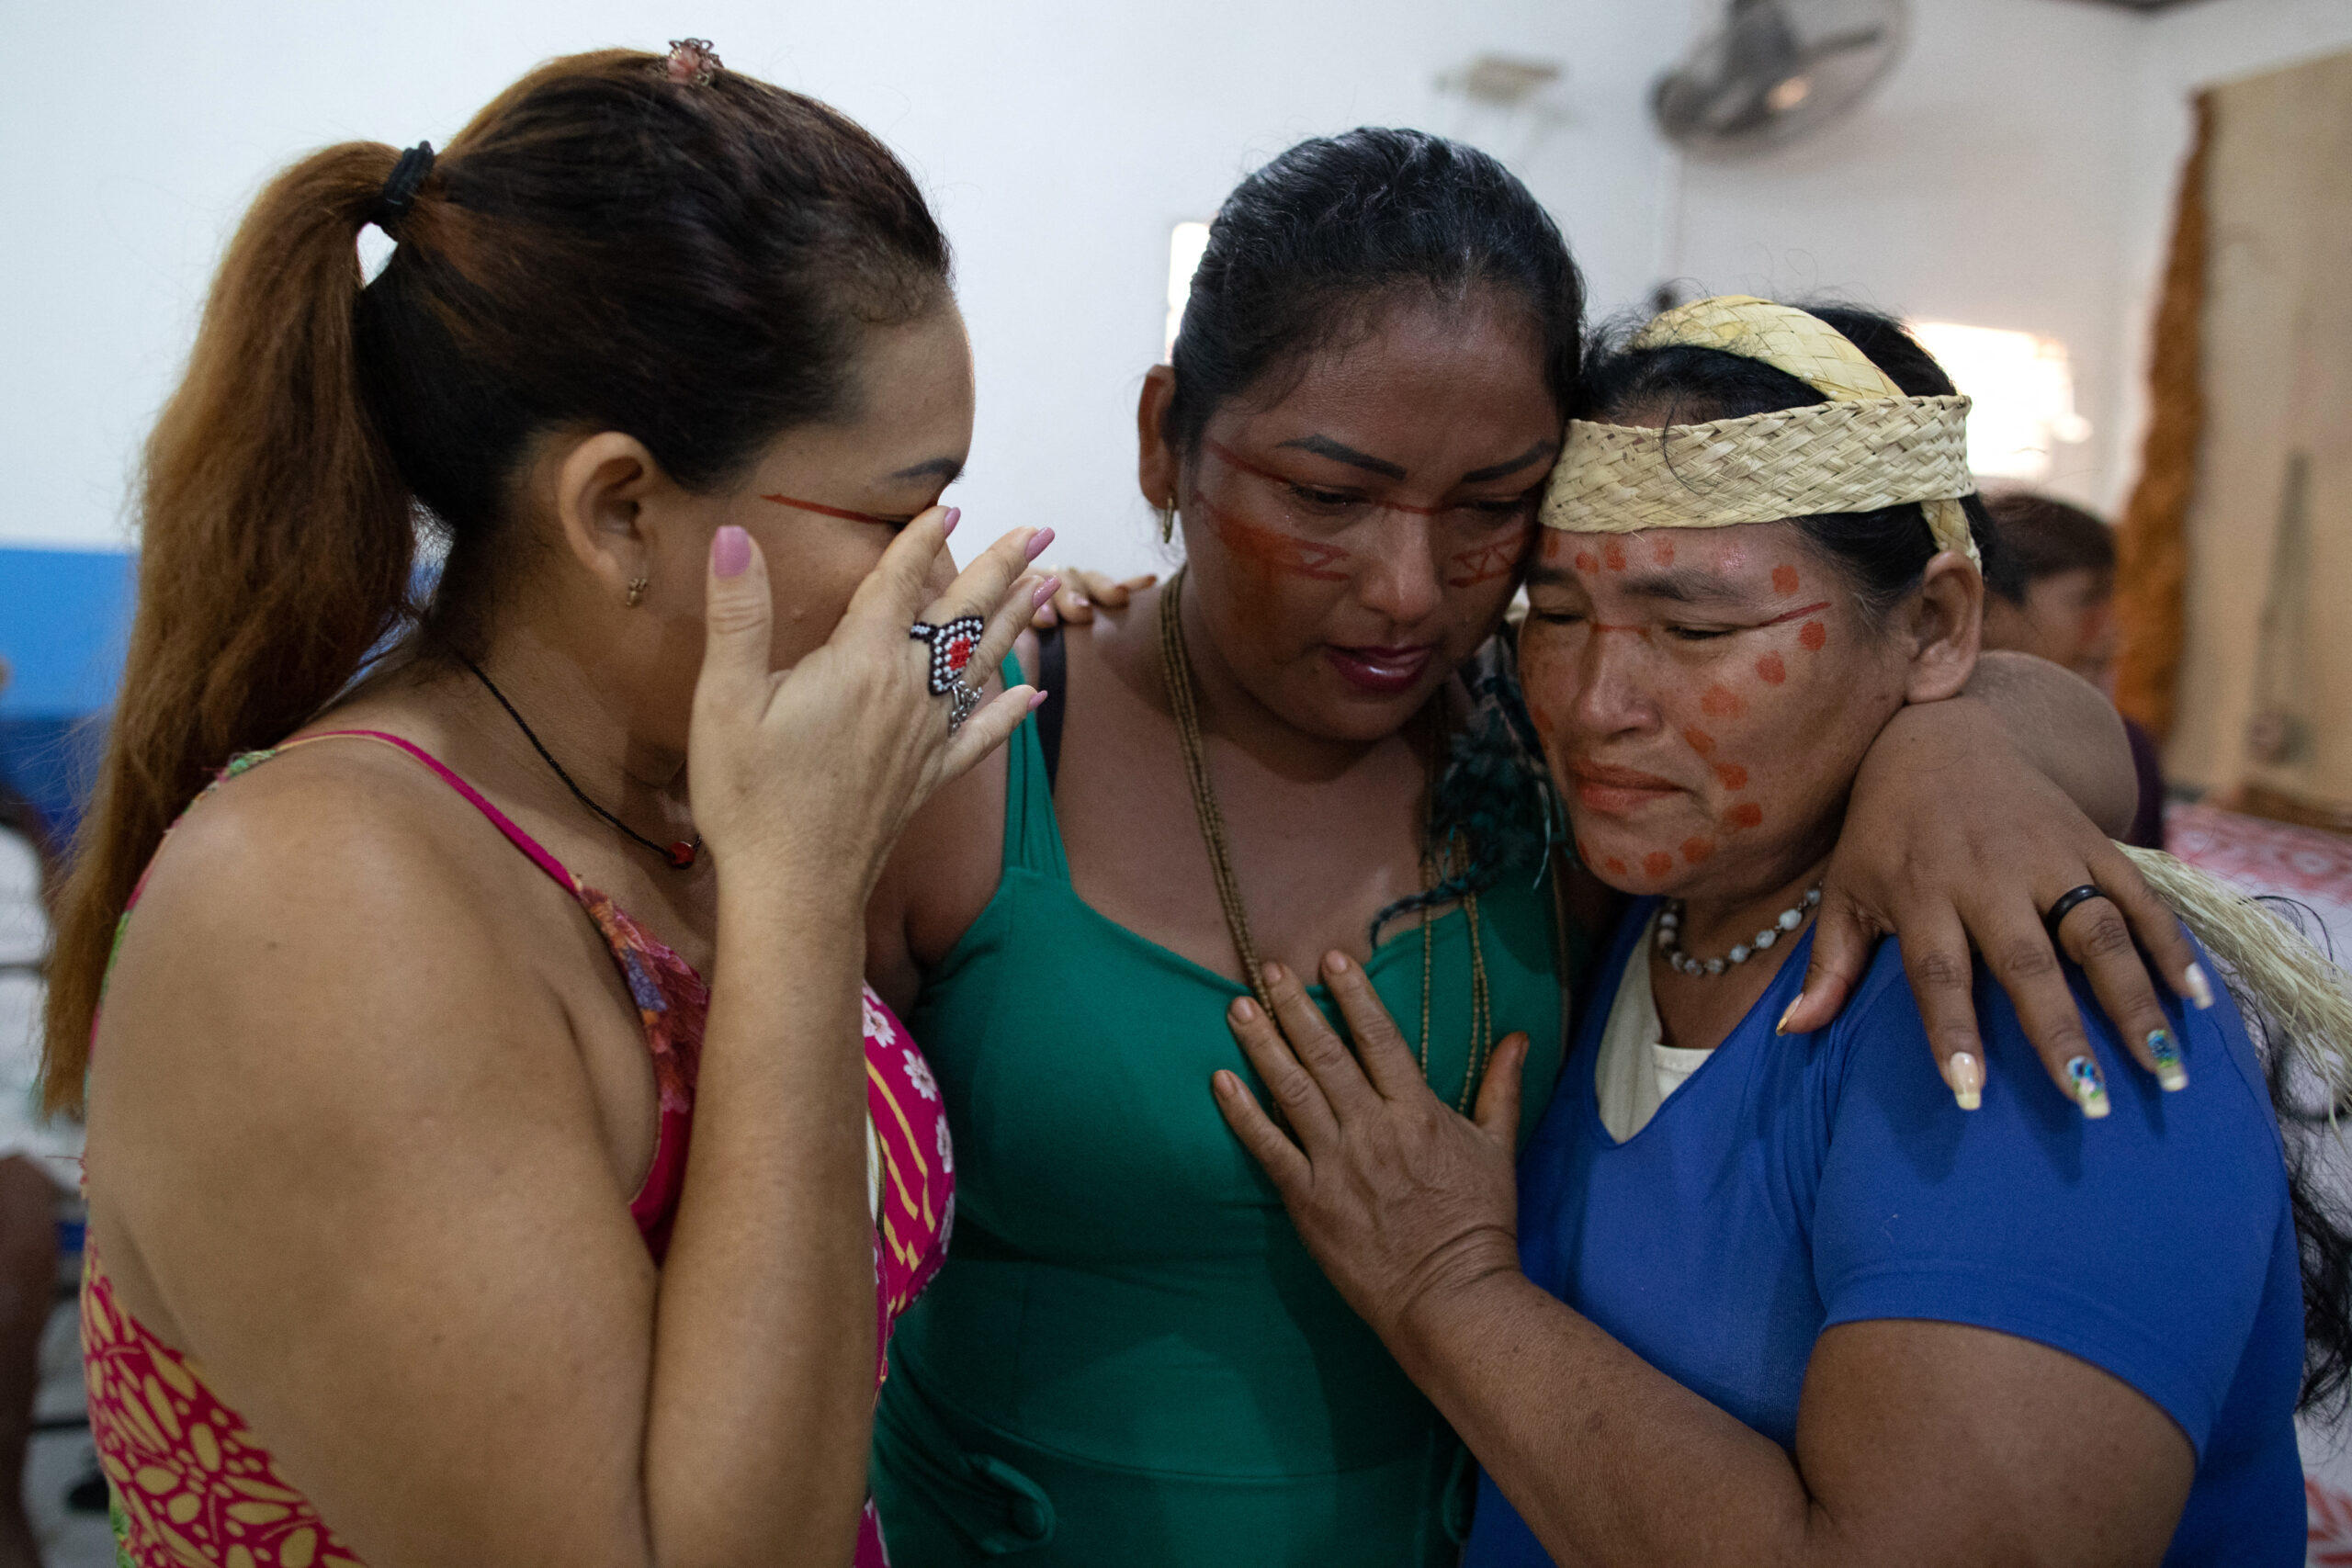 Brazil: 8 out of 10 Women Human and Environmental Rights Defenders in the Amazon Are Violence Victims, NGO Says